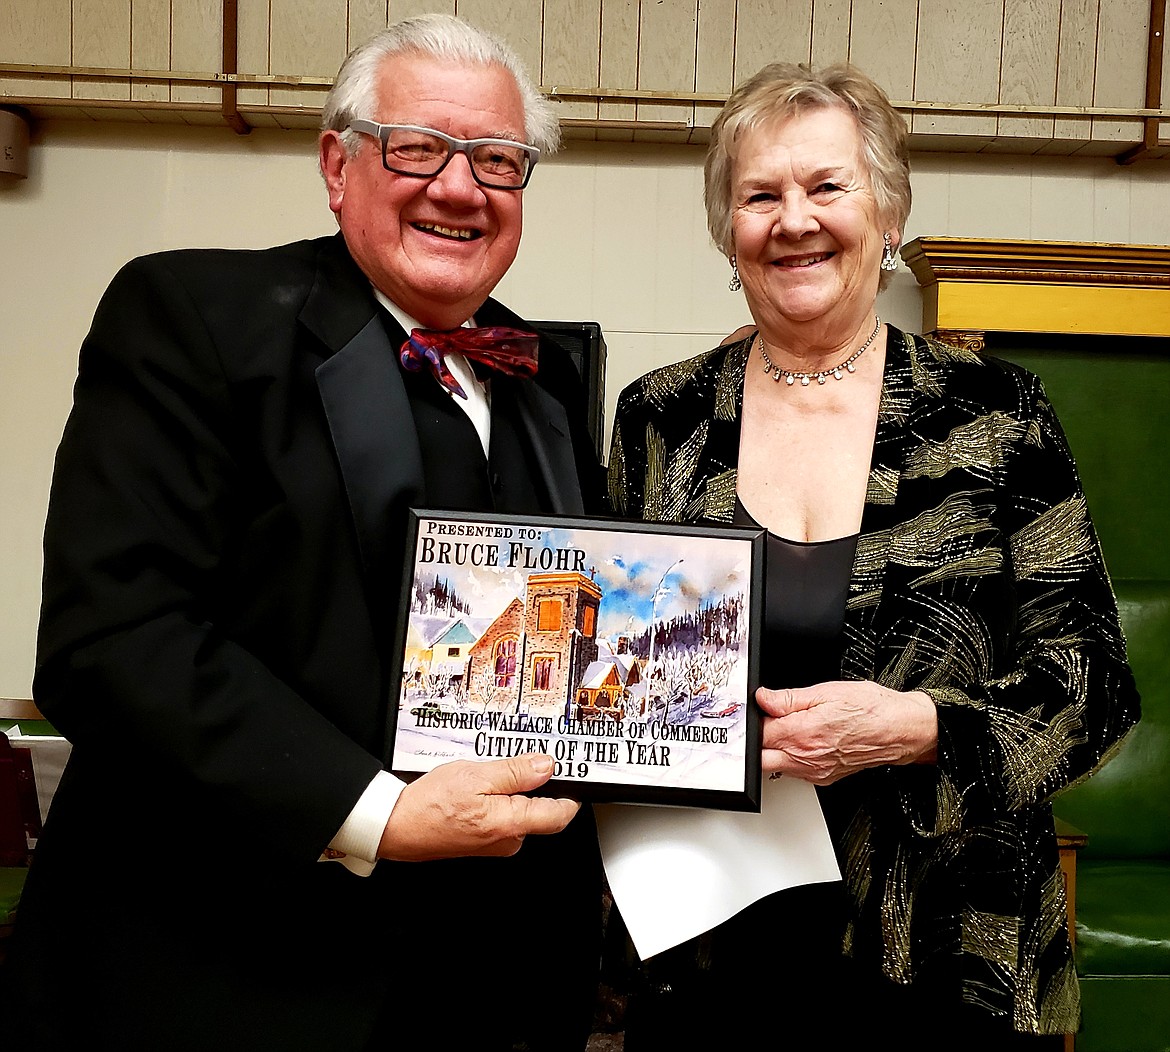 Janet Feiler (right) presents the Historic Wallace Chamber Citizen of the Year award to Bruce Flohr.